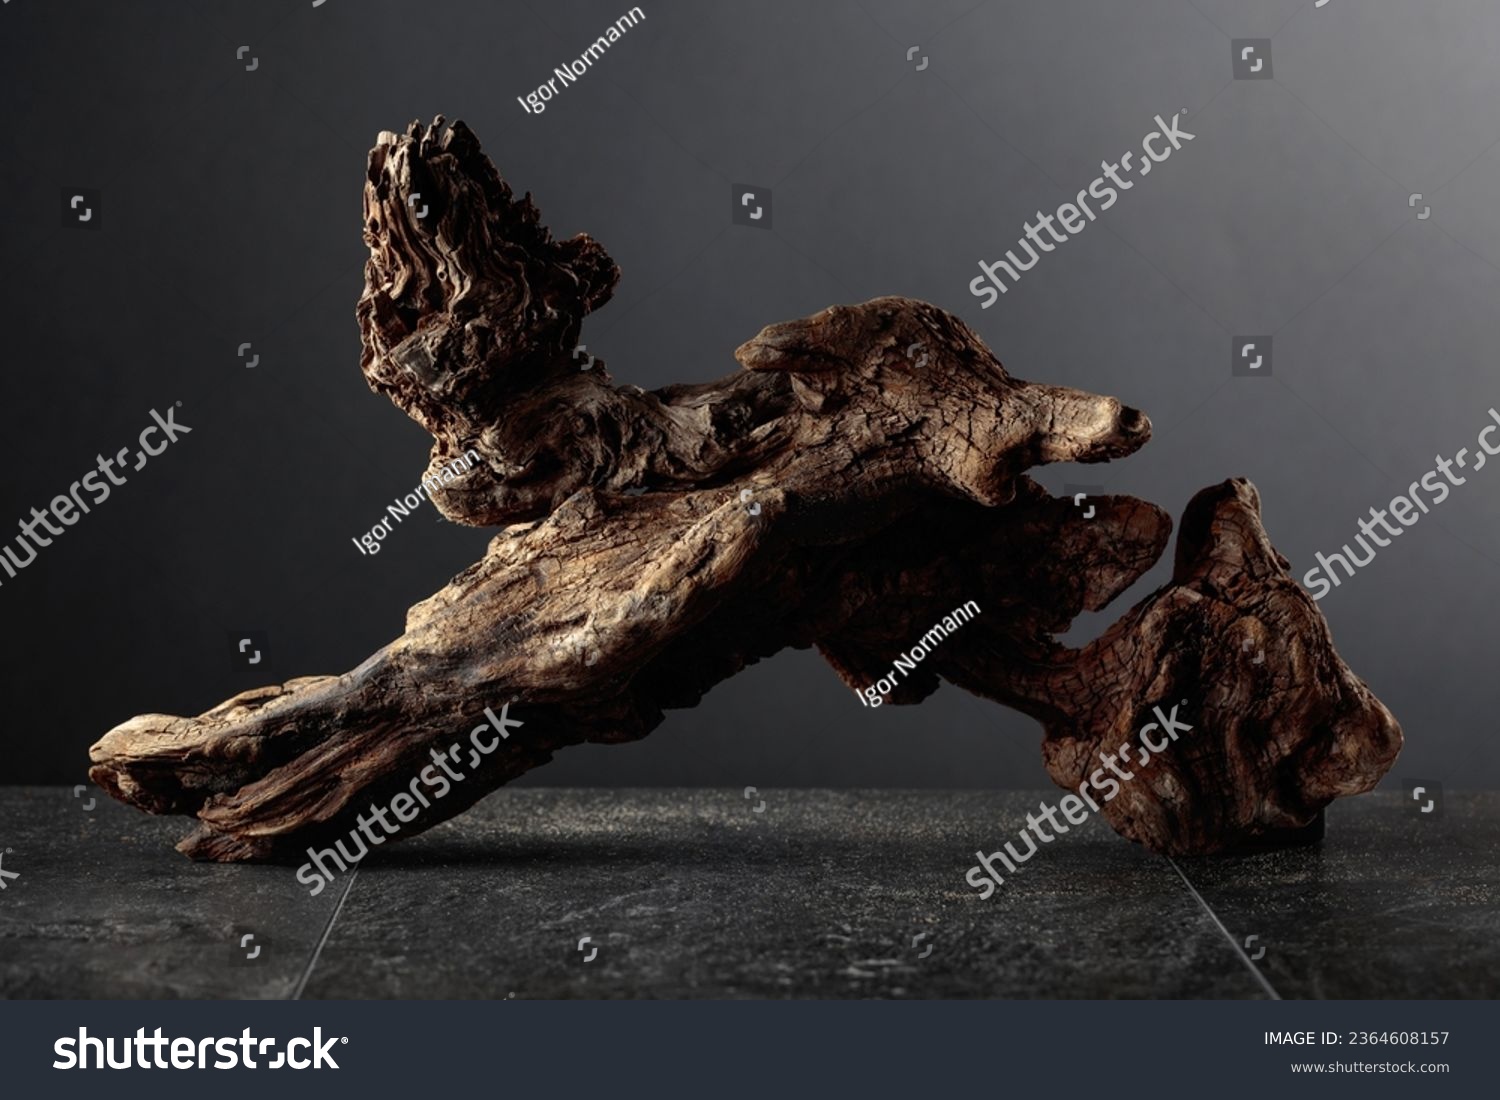 Old dry wooden snag on a black stone table. Black background with copy space. #2364608157